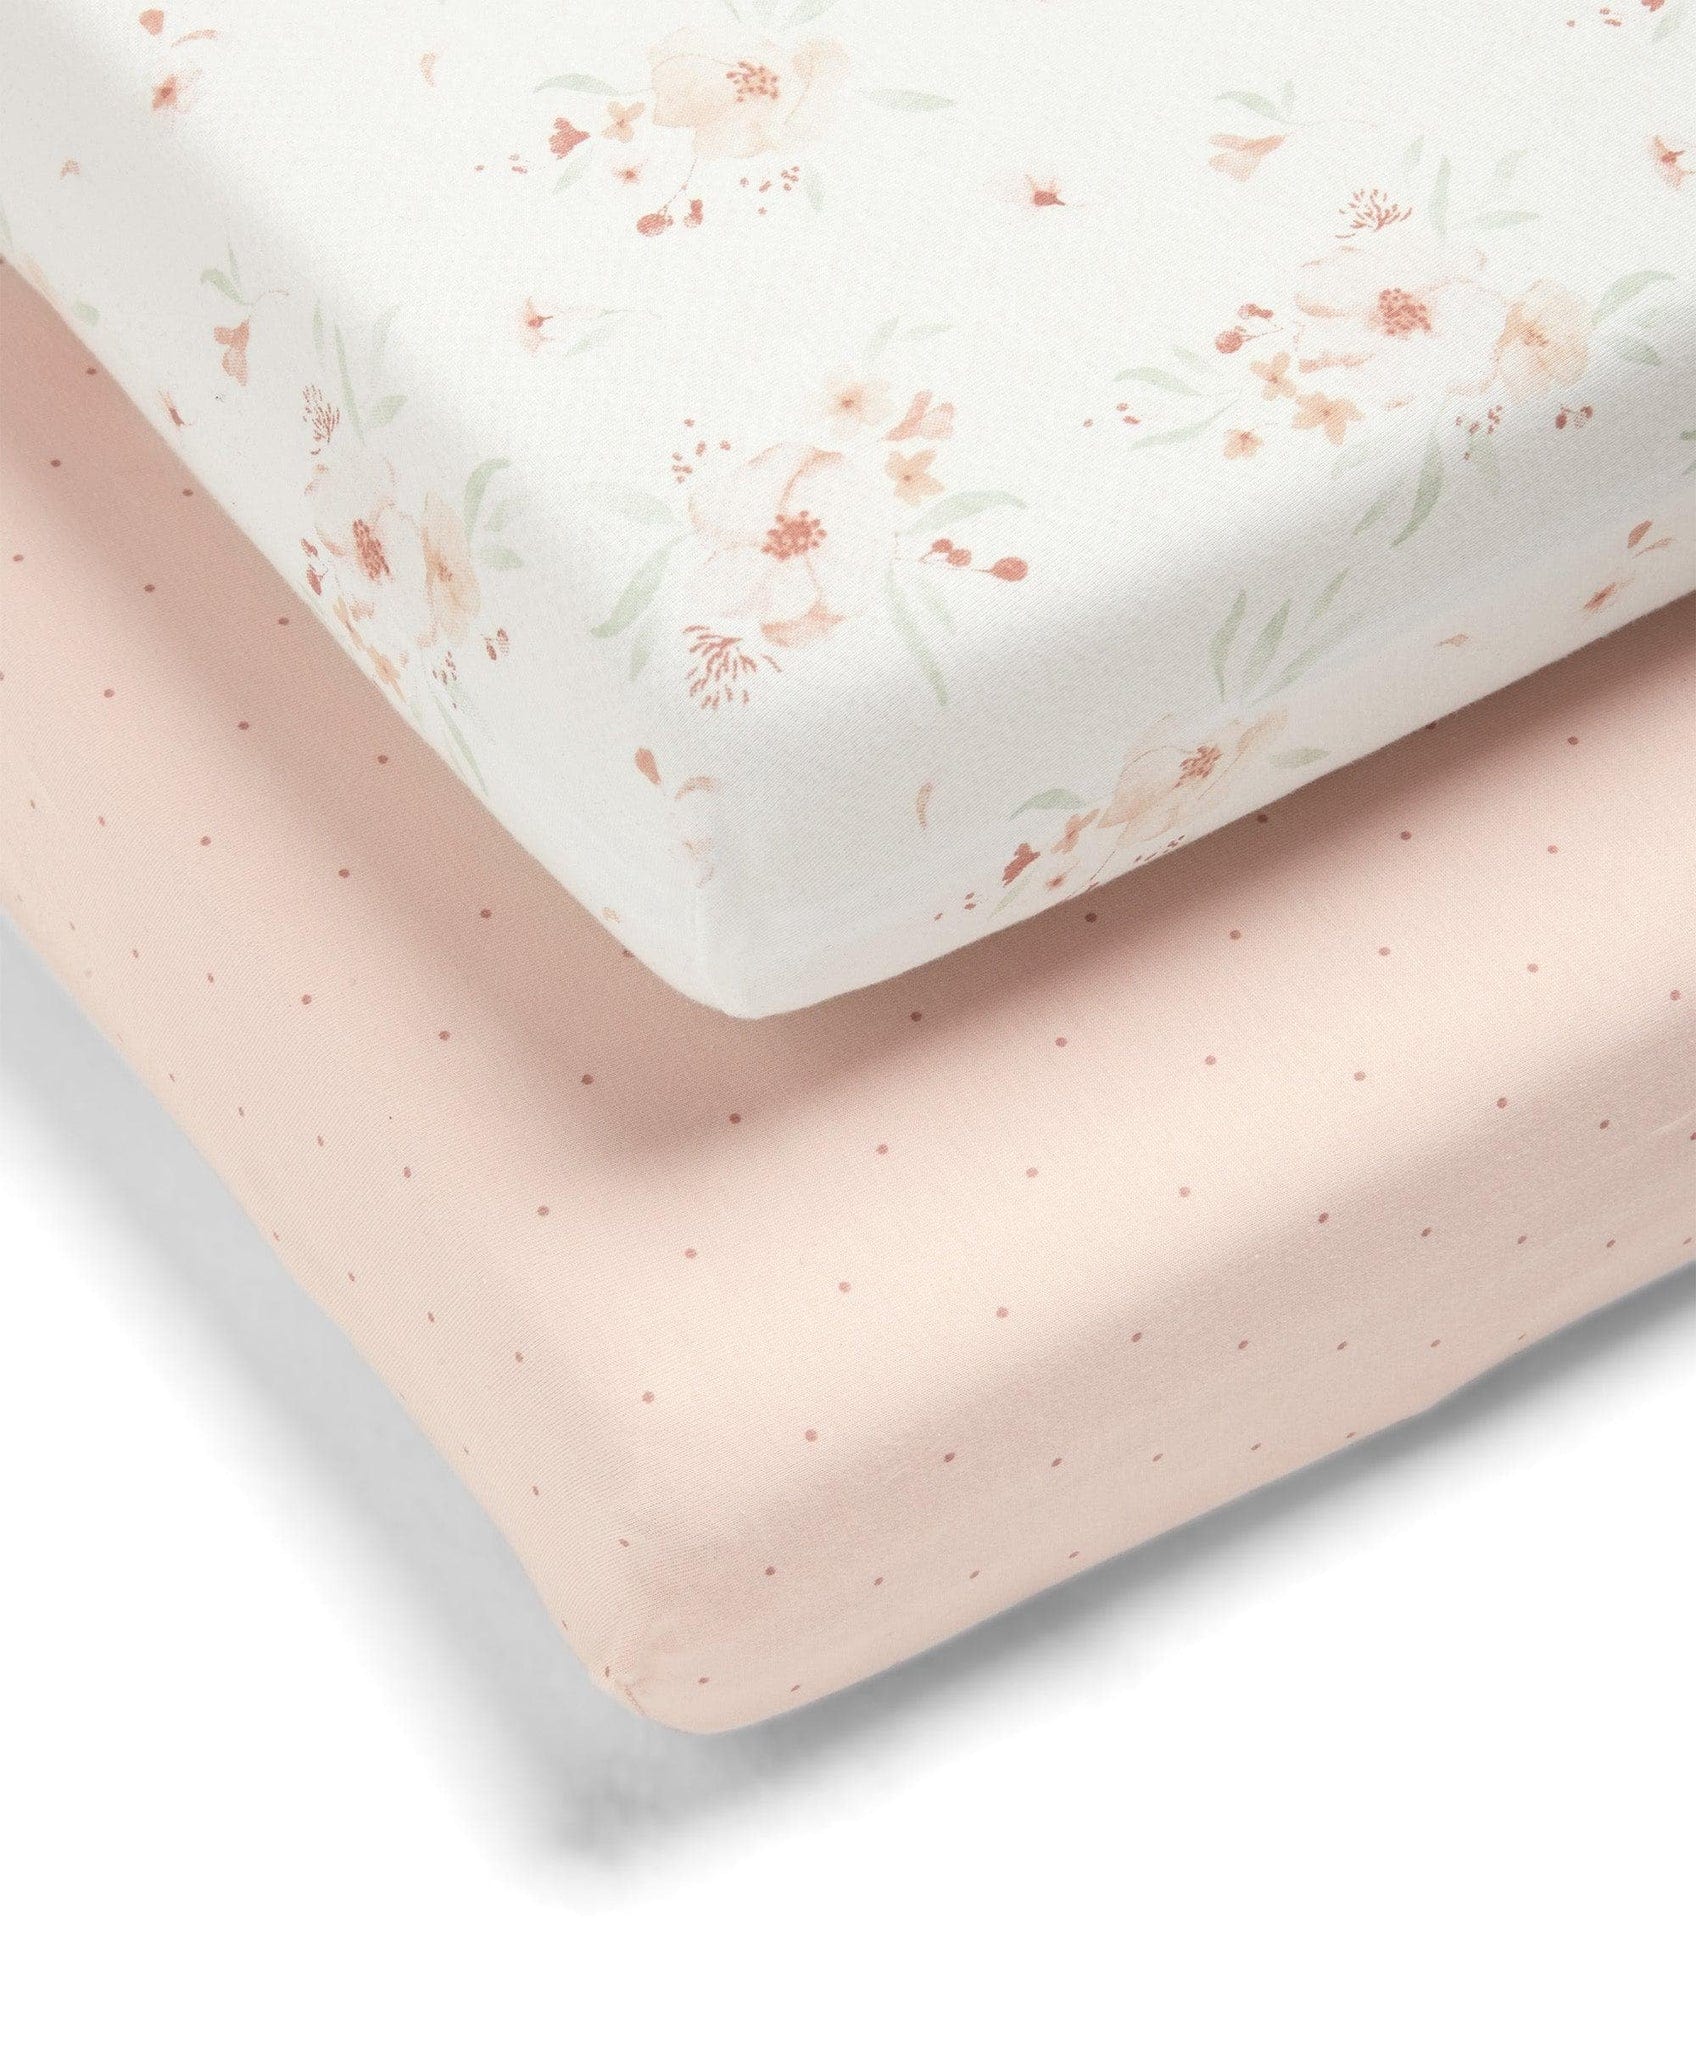 Mamas & Papas Fitted Cotbed Sheets in Floral Cot & Cot Bed Sheets 7797x1600 5057232013471